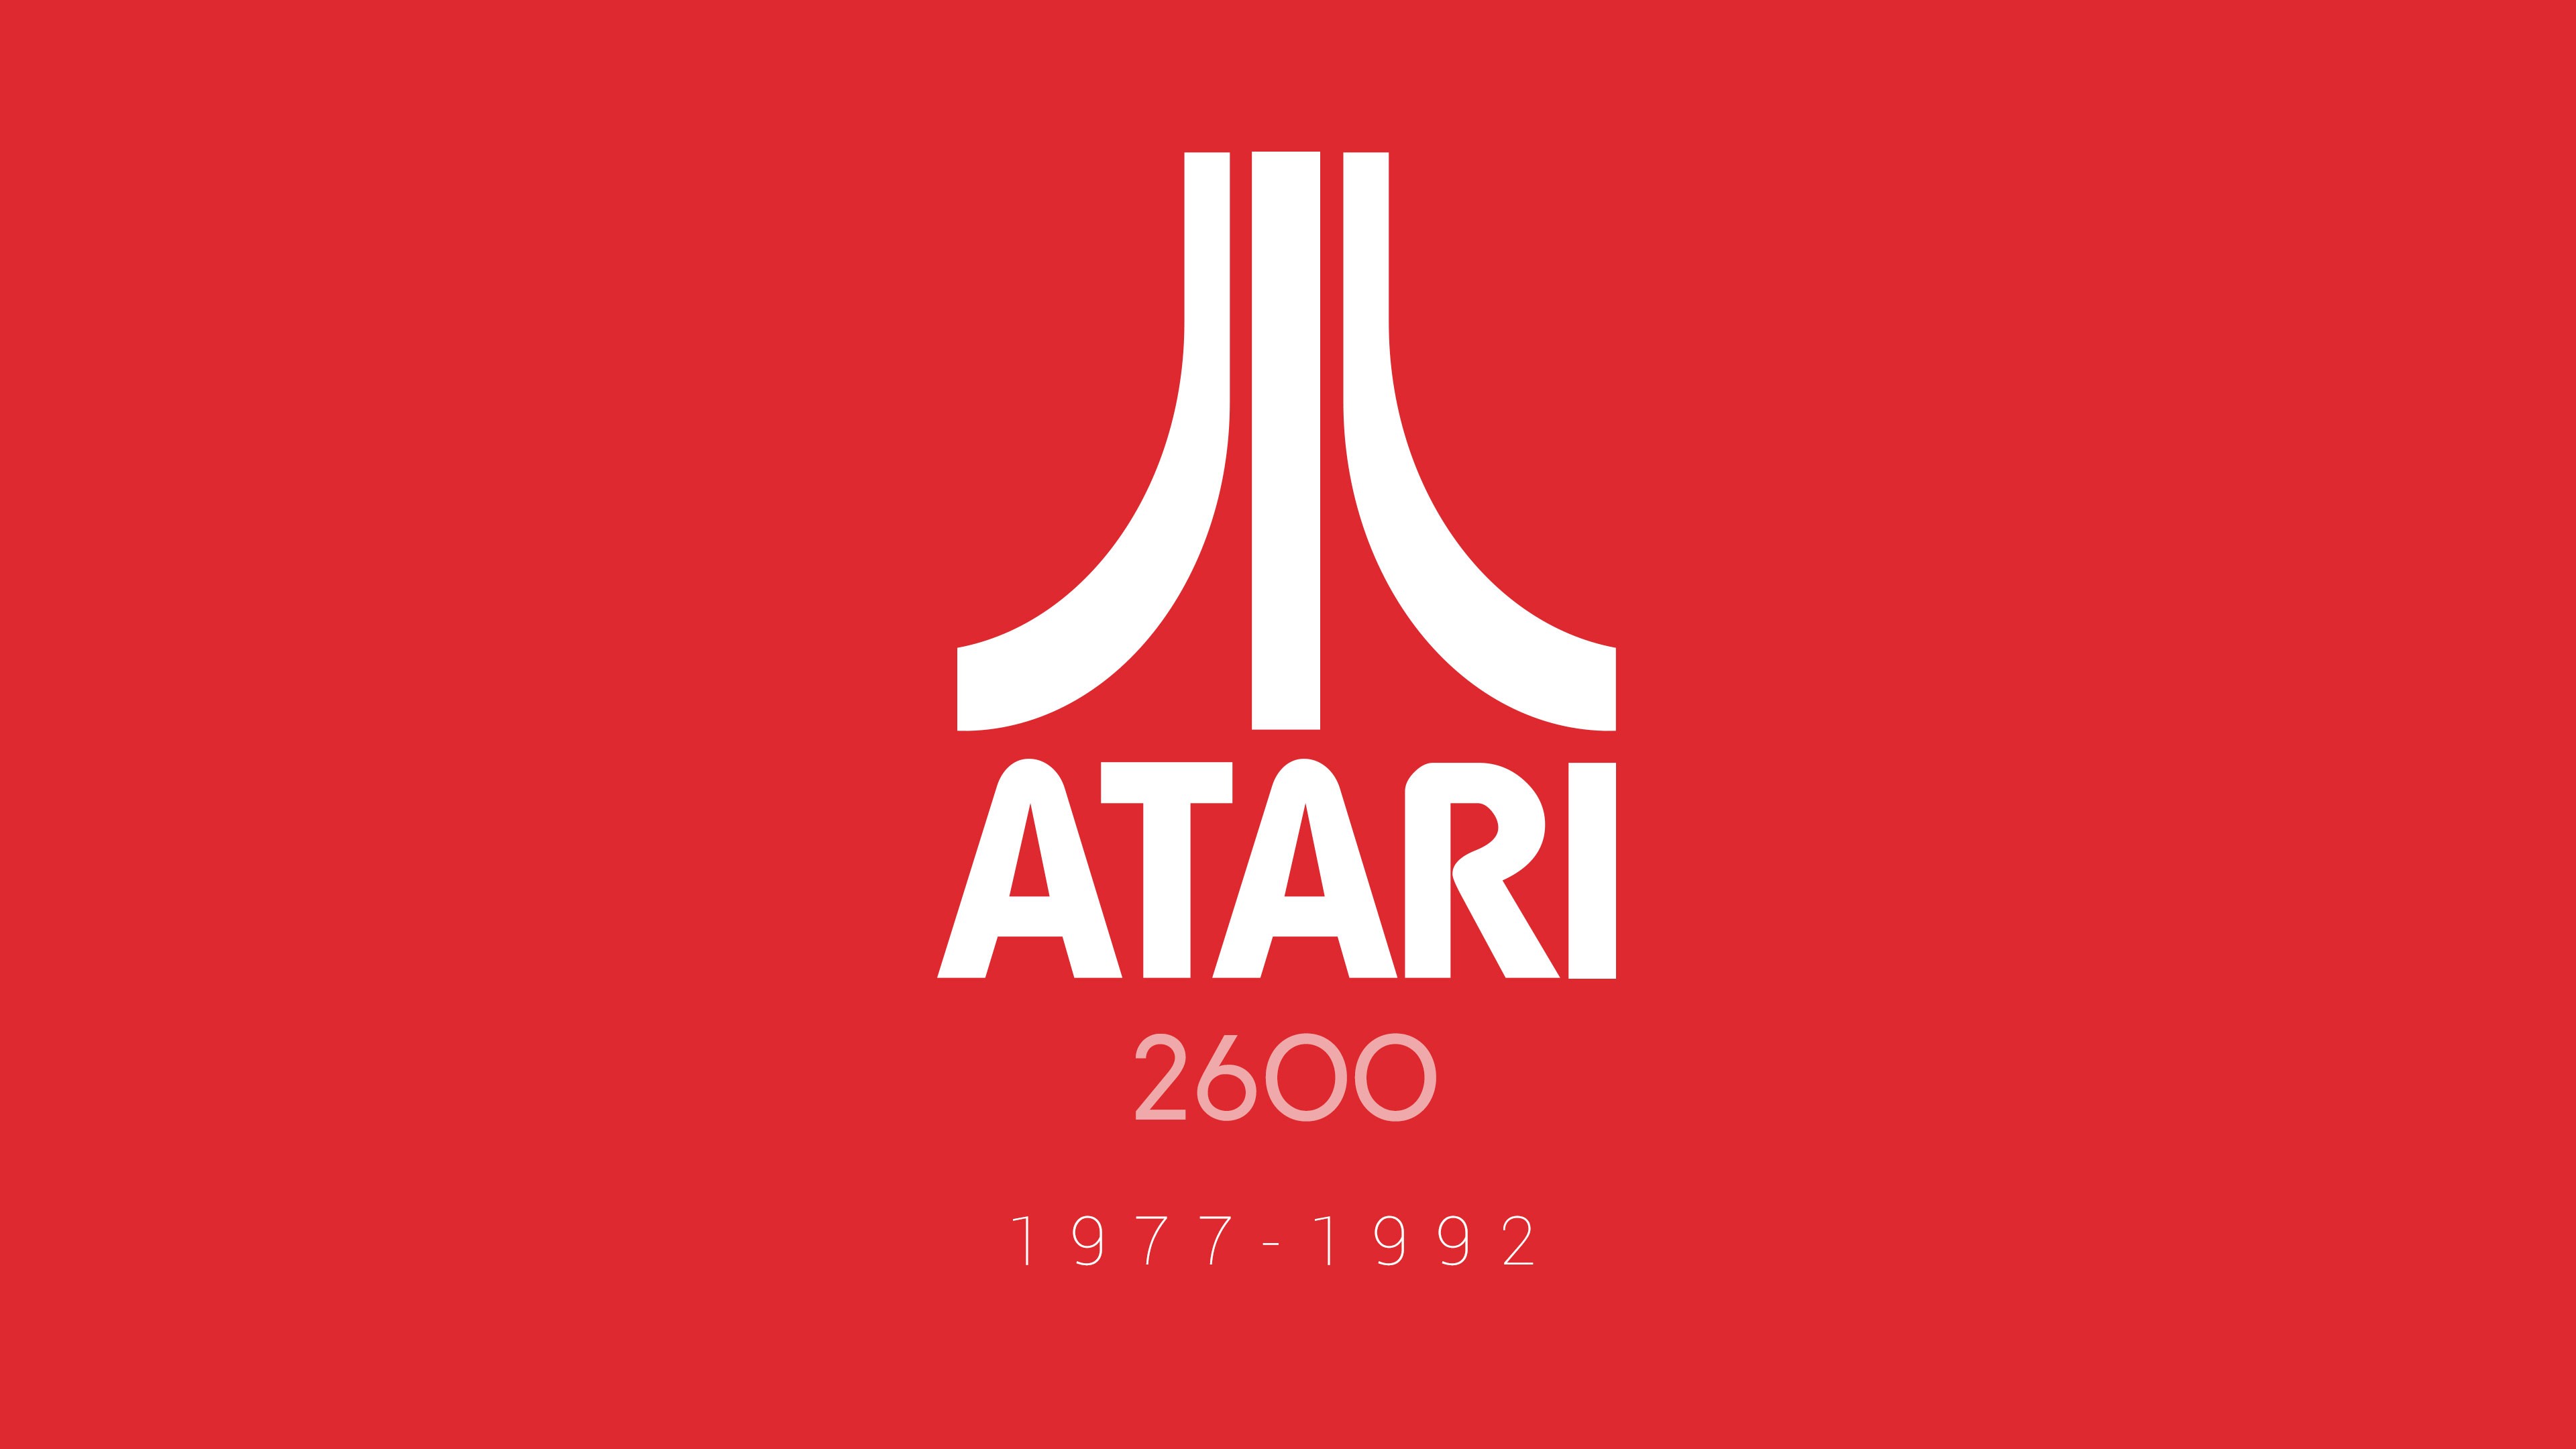 Atari Video Games Logo Red Red Background 3840x2160